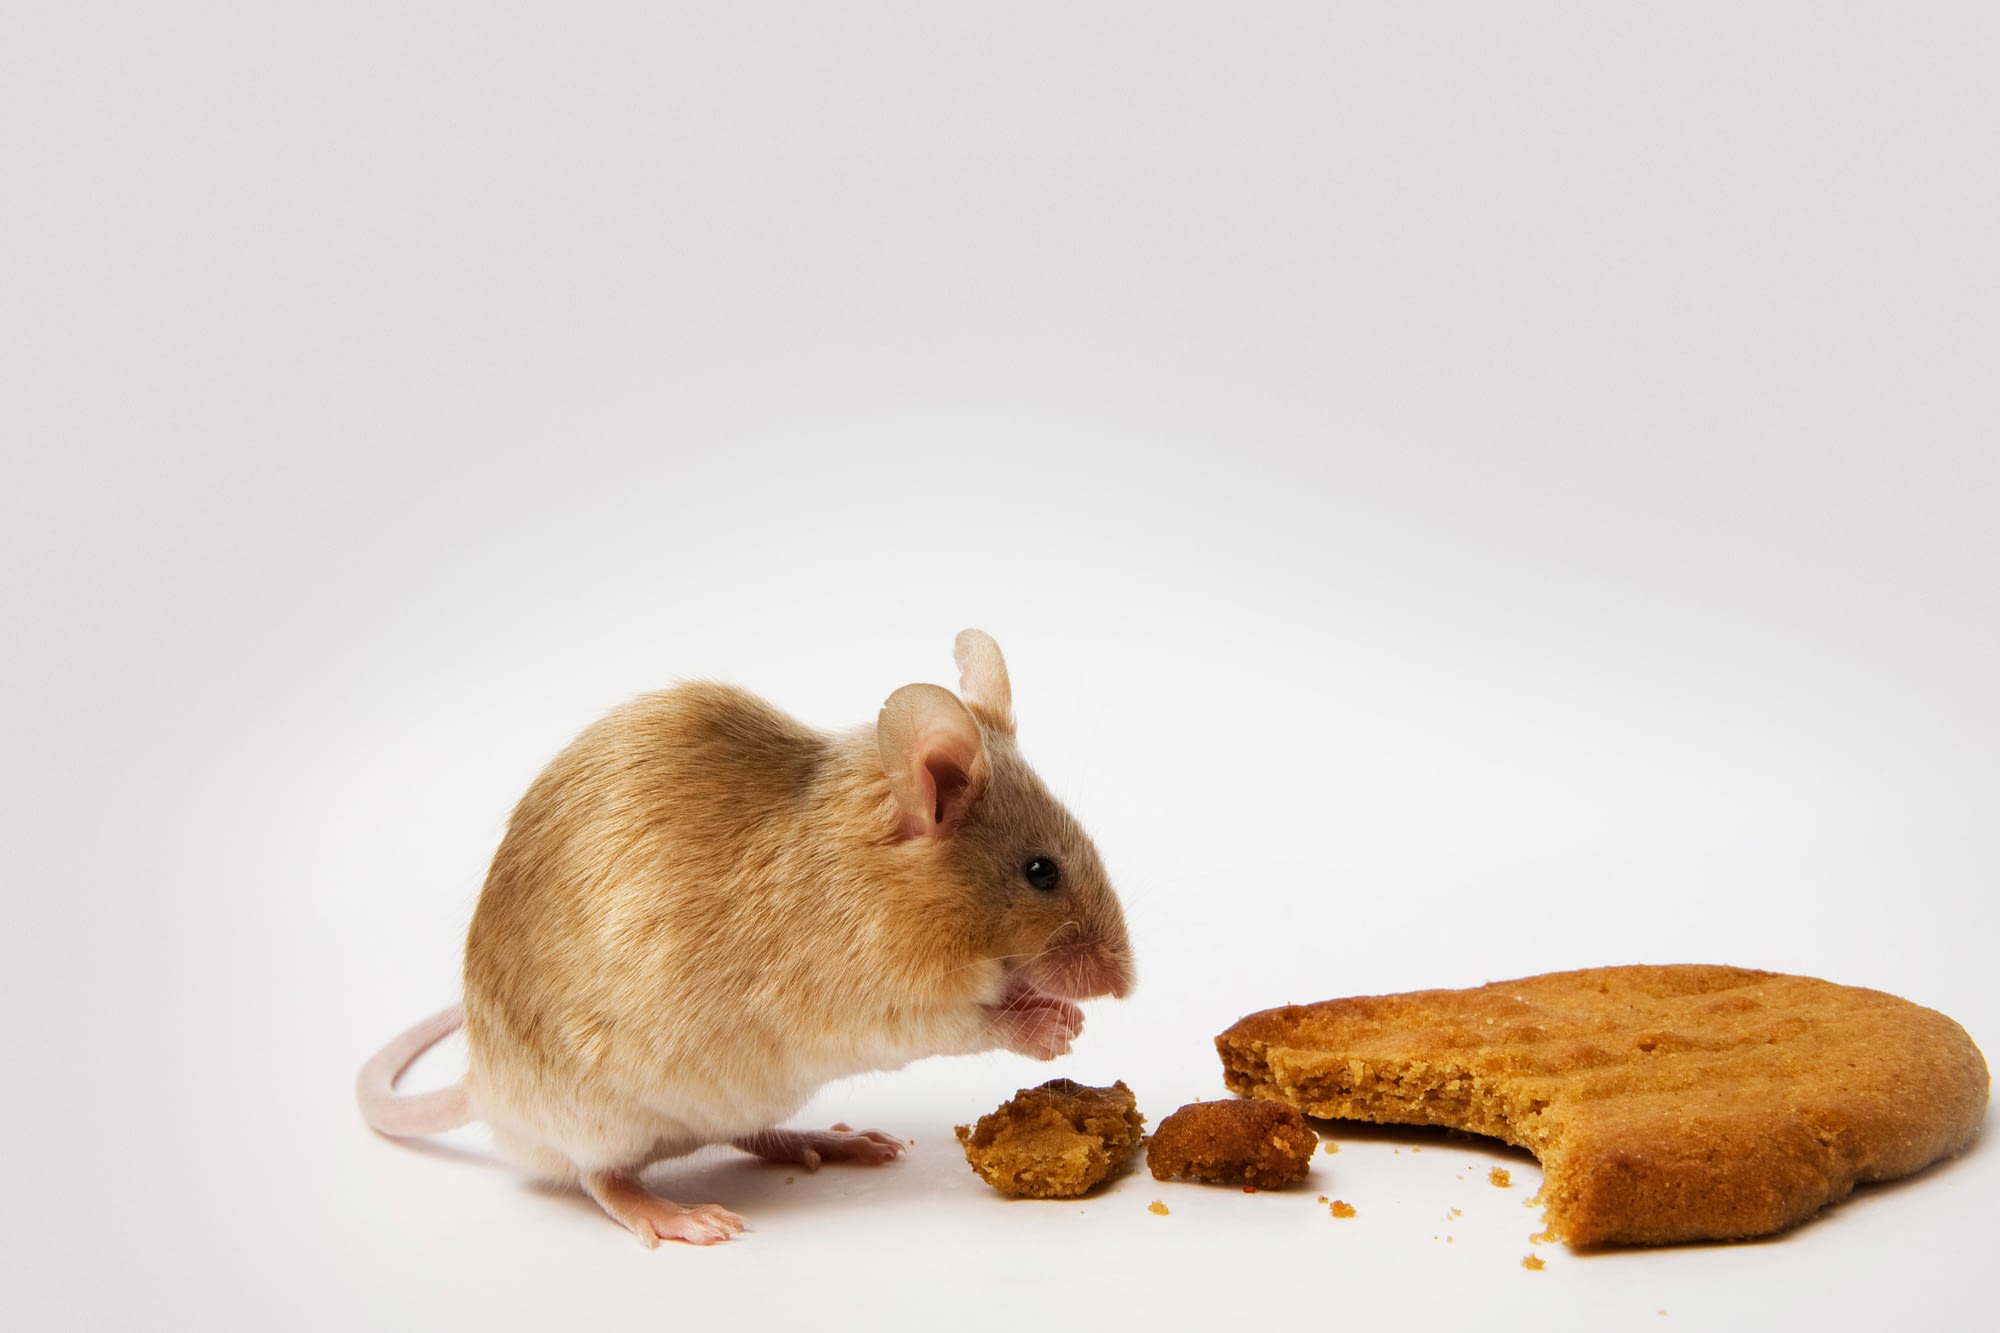 What do mice eat when there is no food?